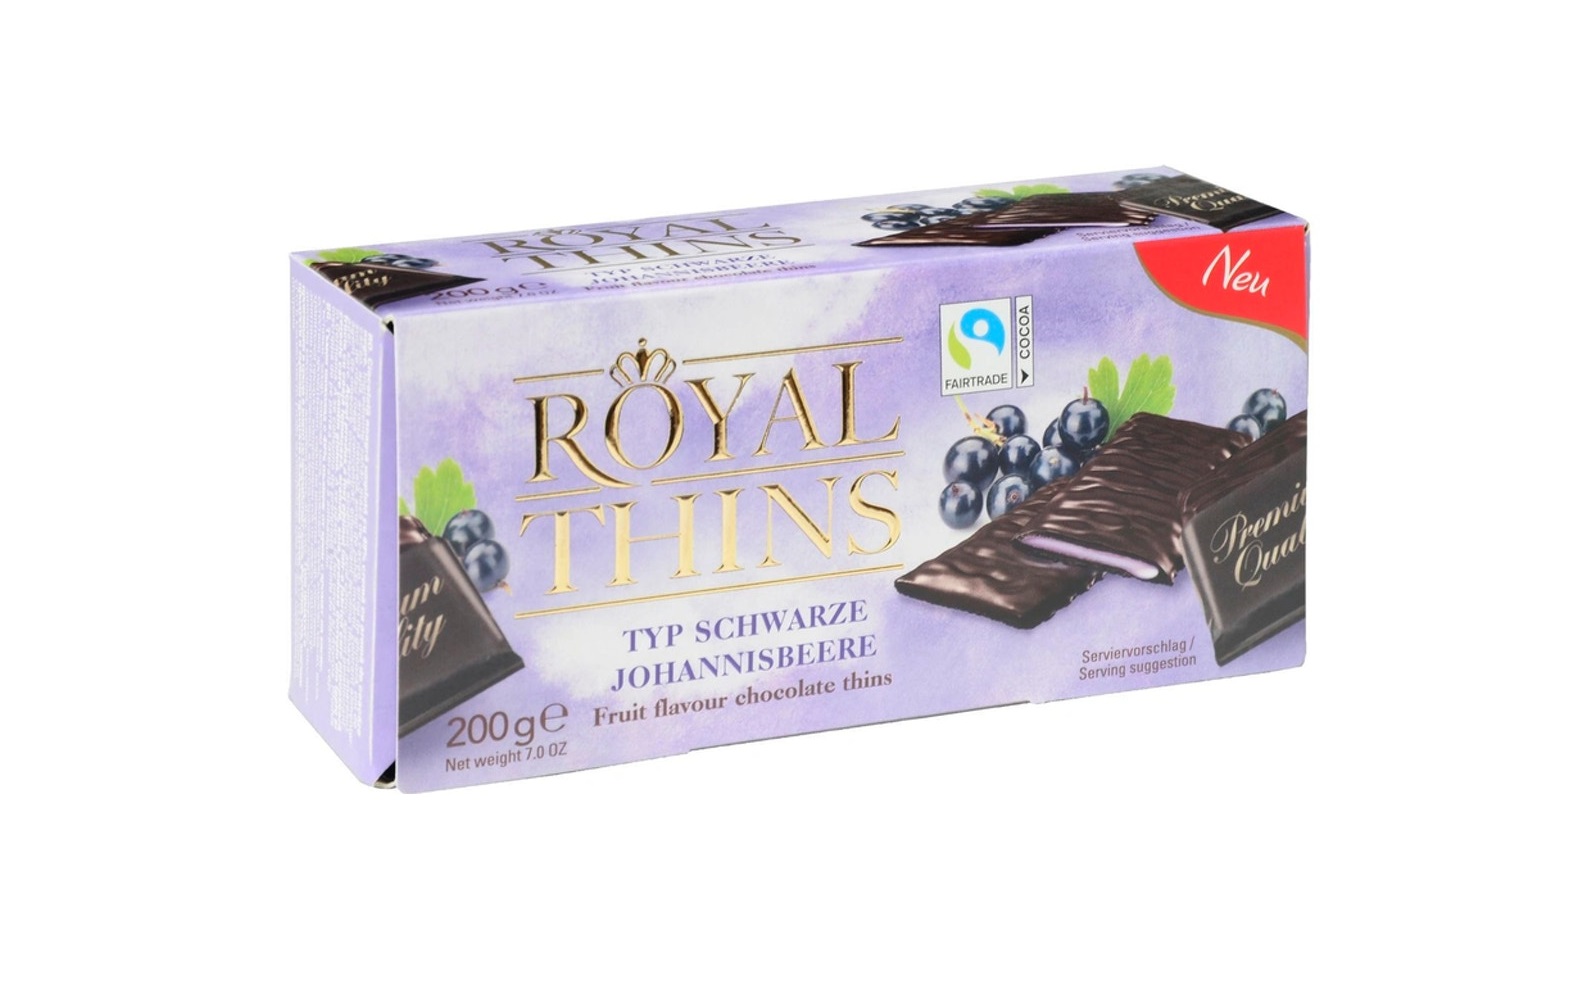 Royal Thins blackcurrant filled with dark chocolate 200g